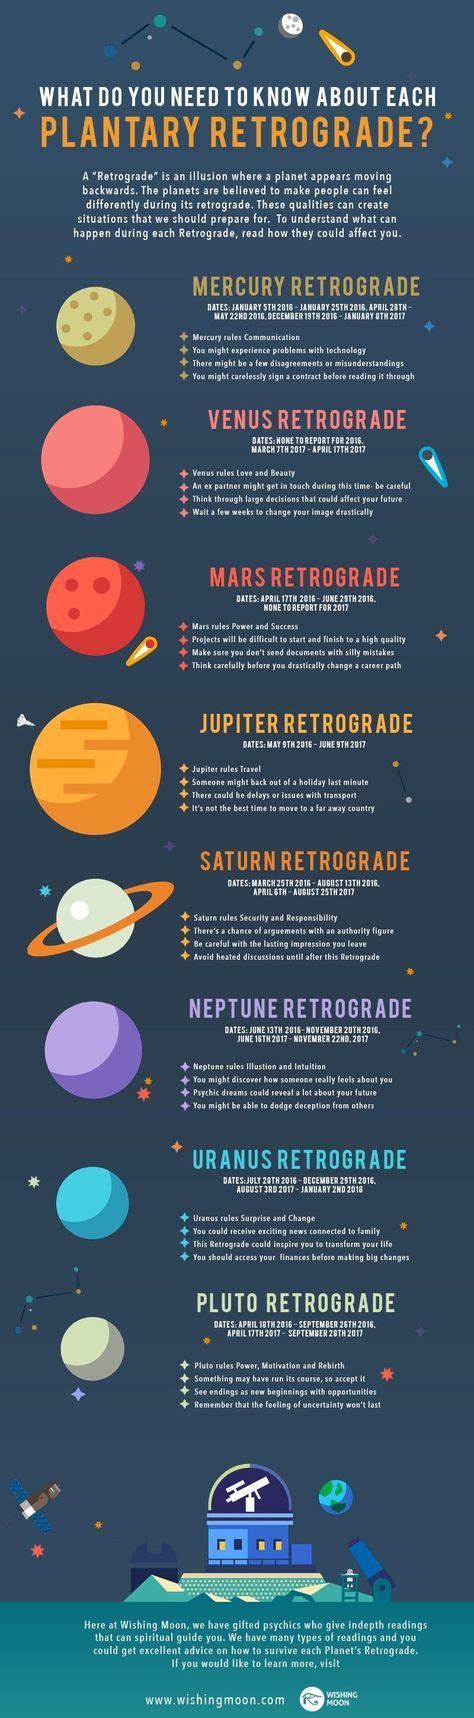 when was the last time 7 planets were in retrograde